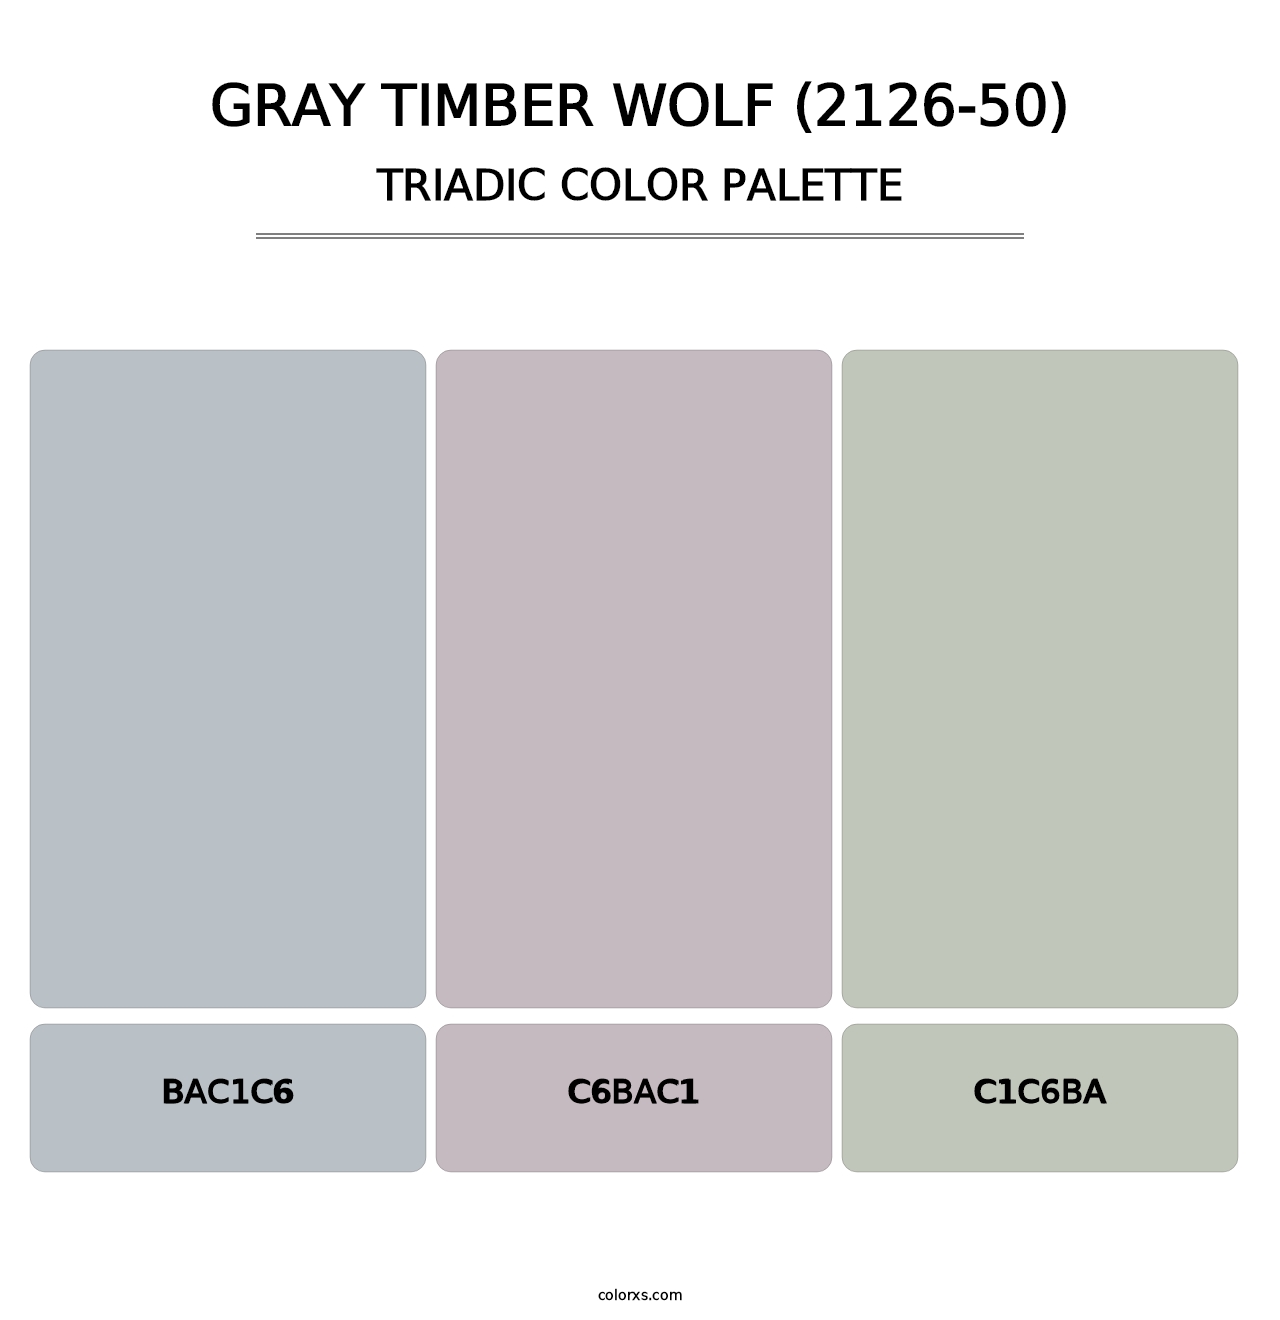 Gray Timber Wolf (2126-50) - Triadic Color Palette